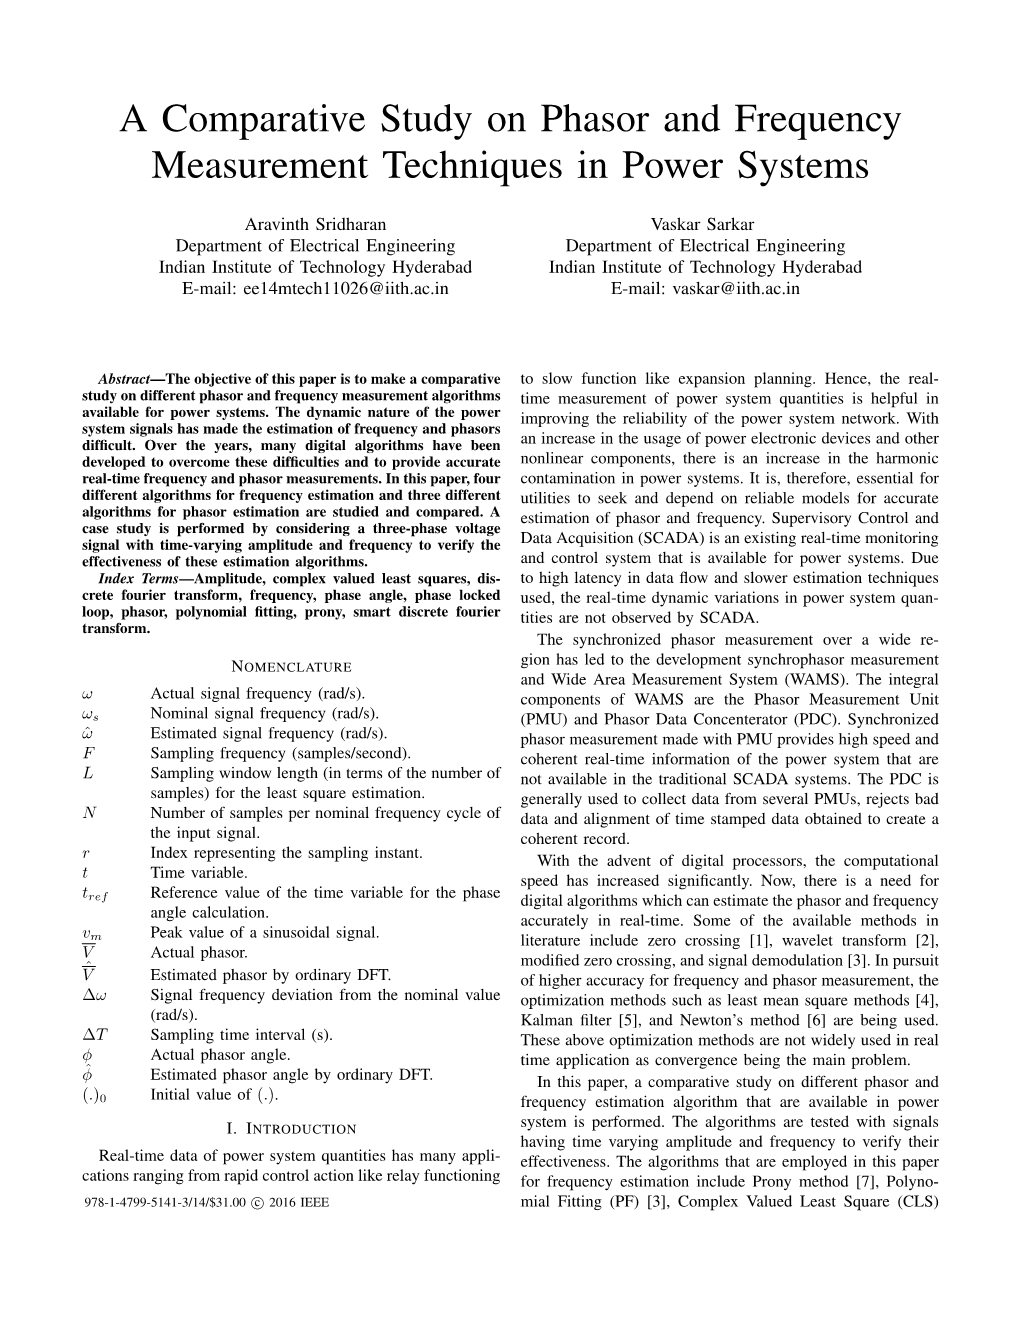 A Comparative Study on Phasor and Frequency Measurement Techniques in Power Systems